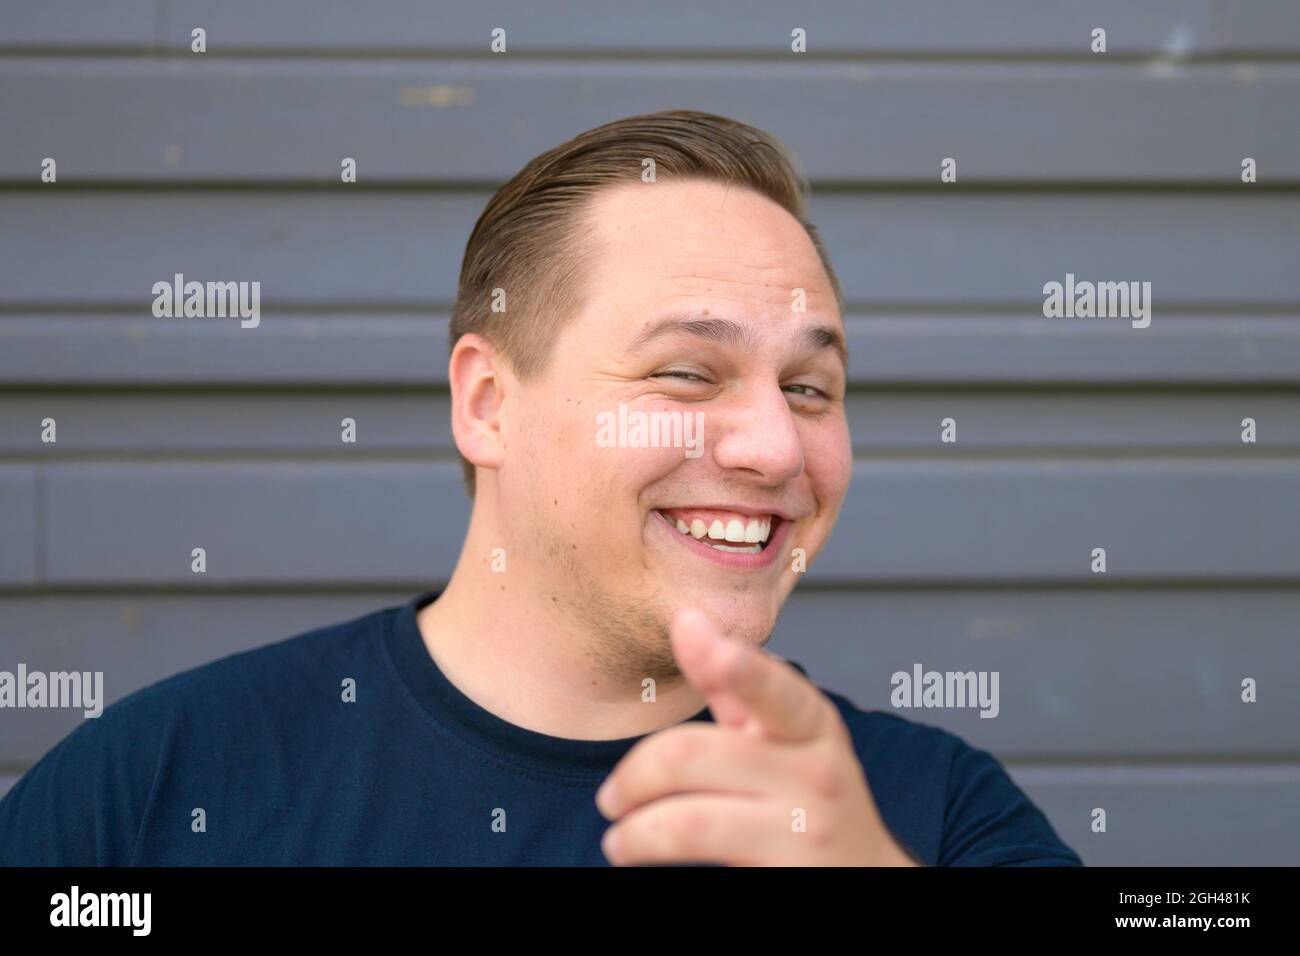 Gleeful young man pointing at the camera with a beaming smile of amusement as he poses against a grey exterior wall with focus to his face Stock Photo